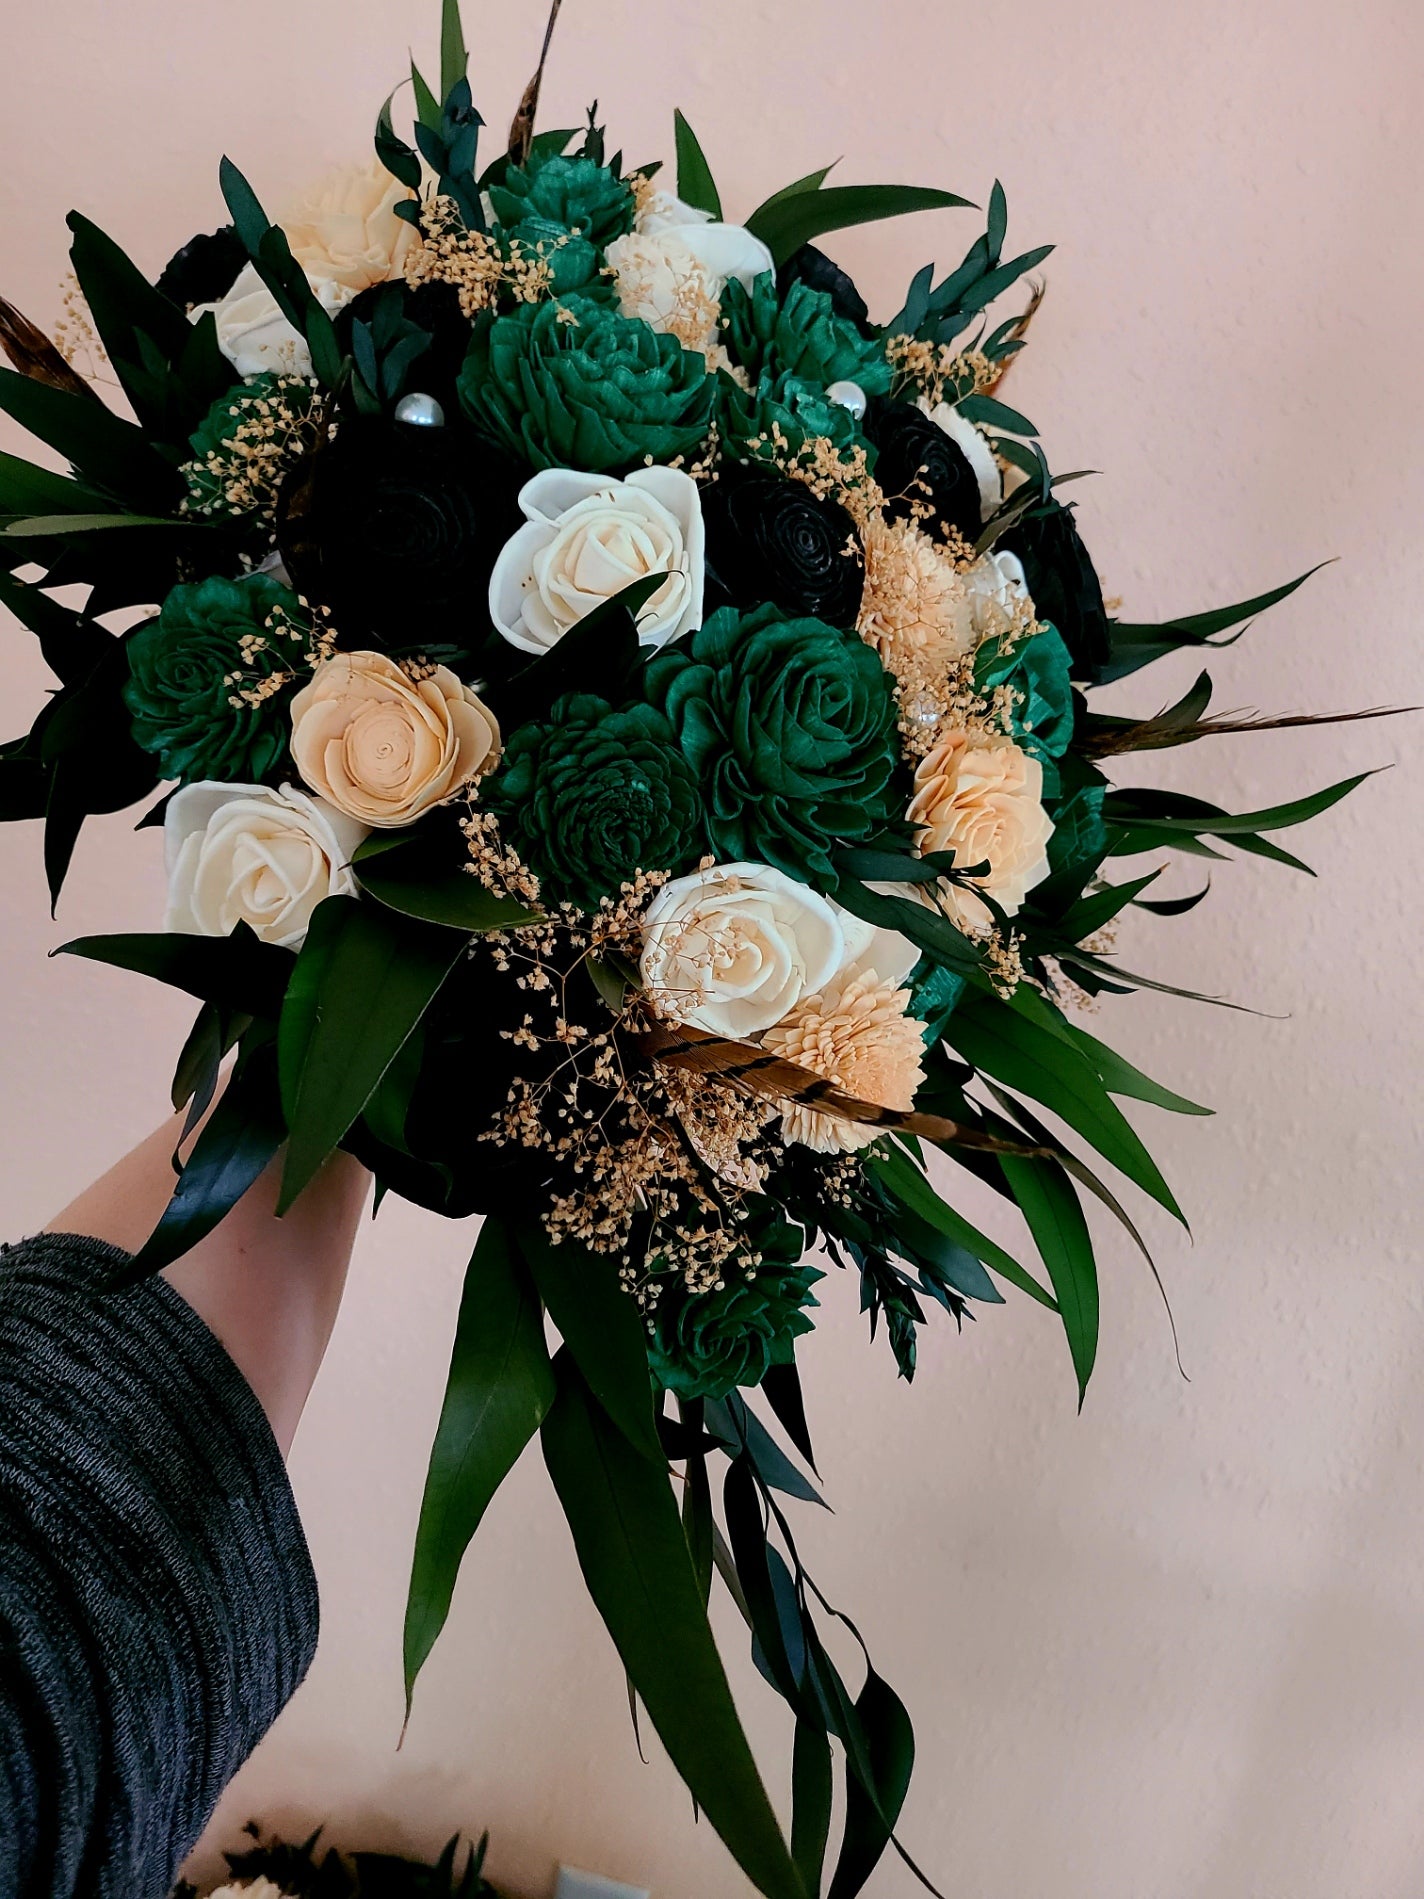 Ivory & Gold Pins Bouquet